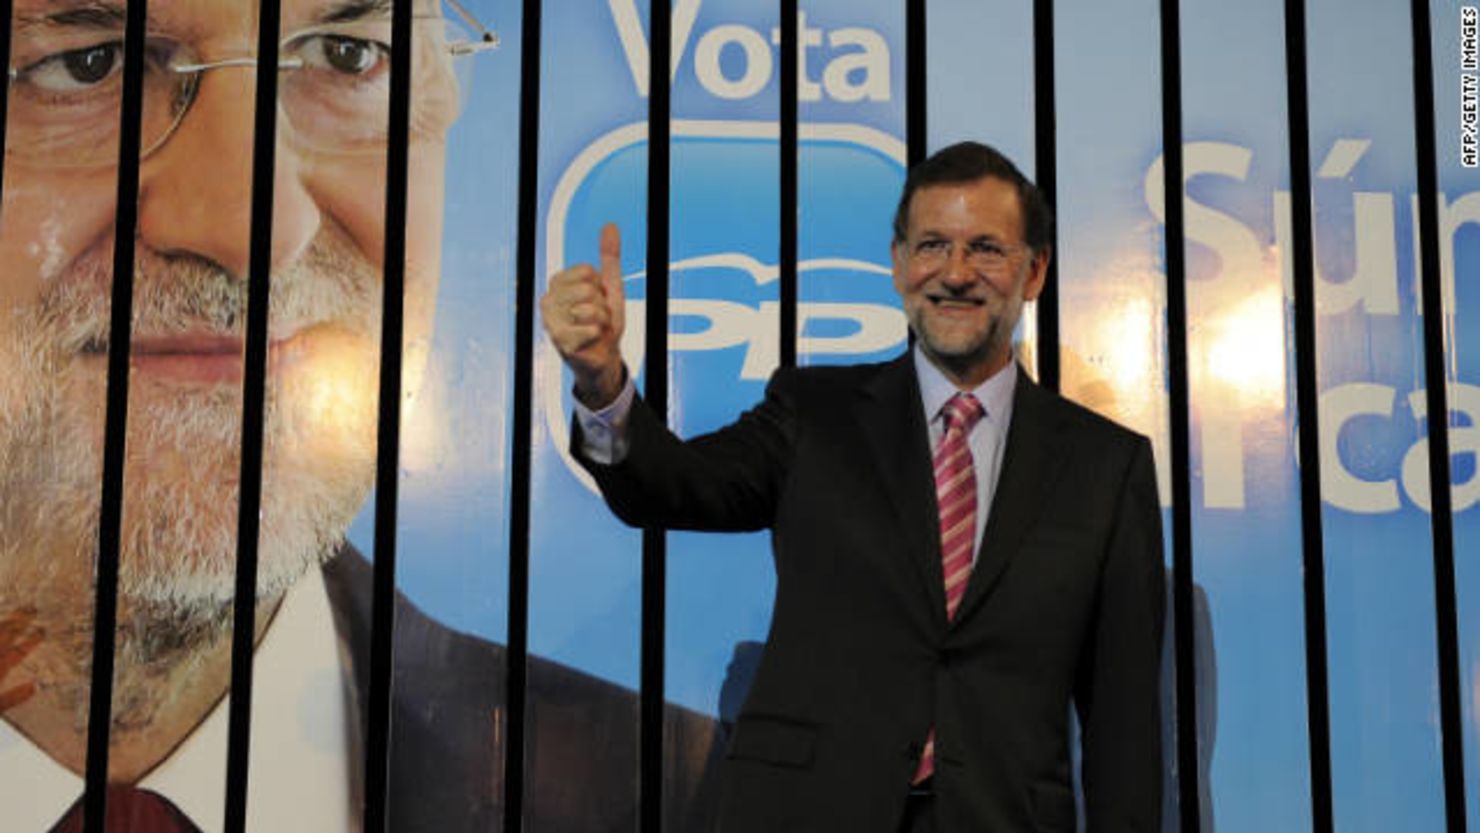 CNNE 6246b736 - 111104052244-spain-elections-rajoy-story-top